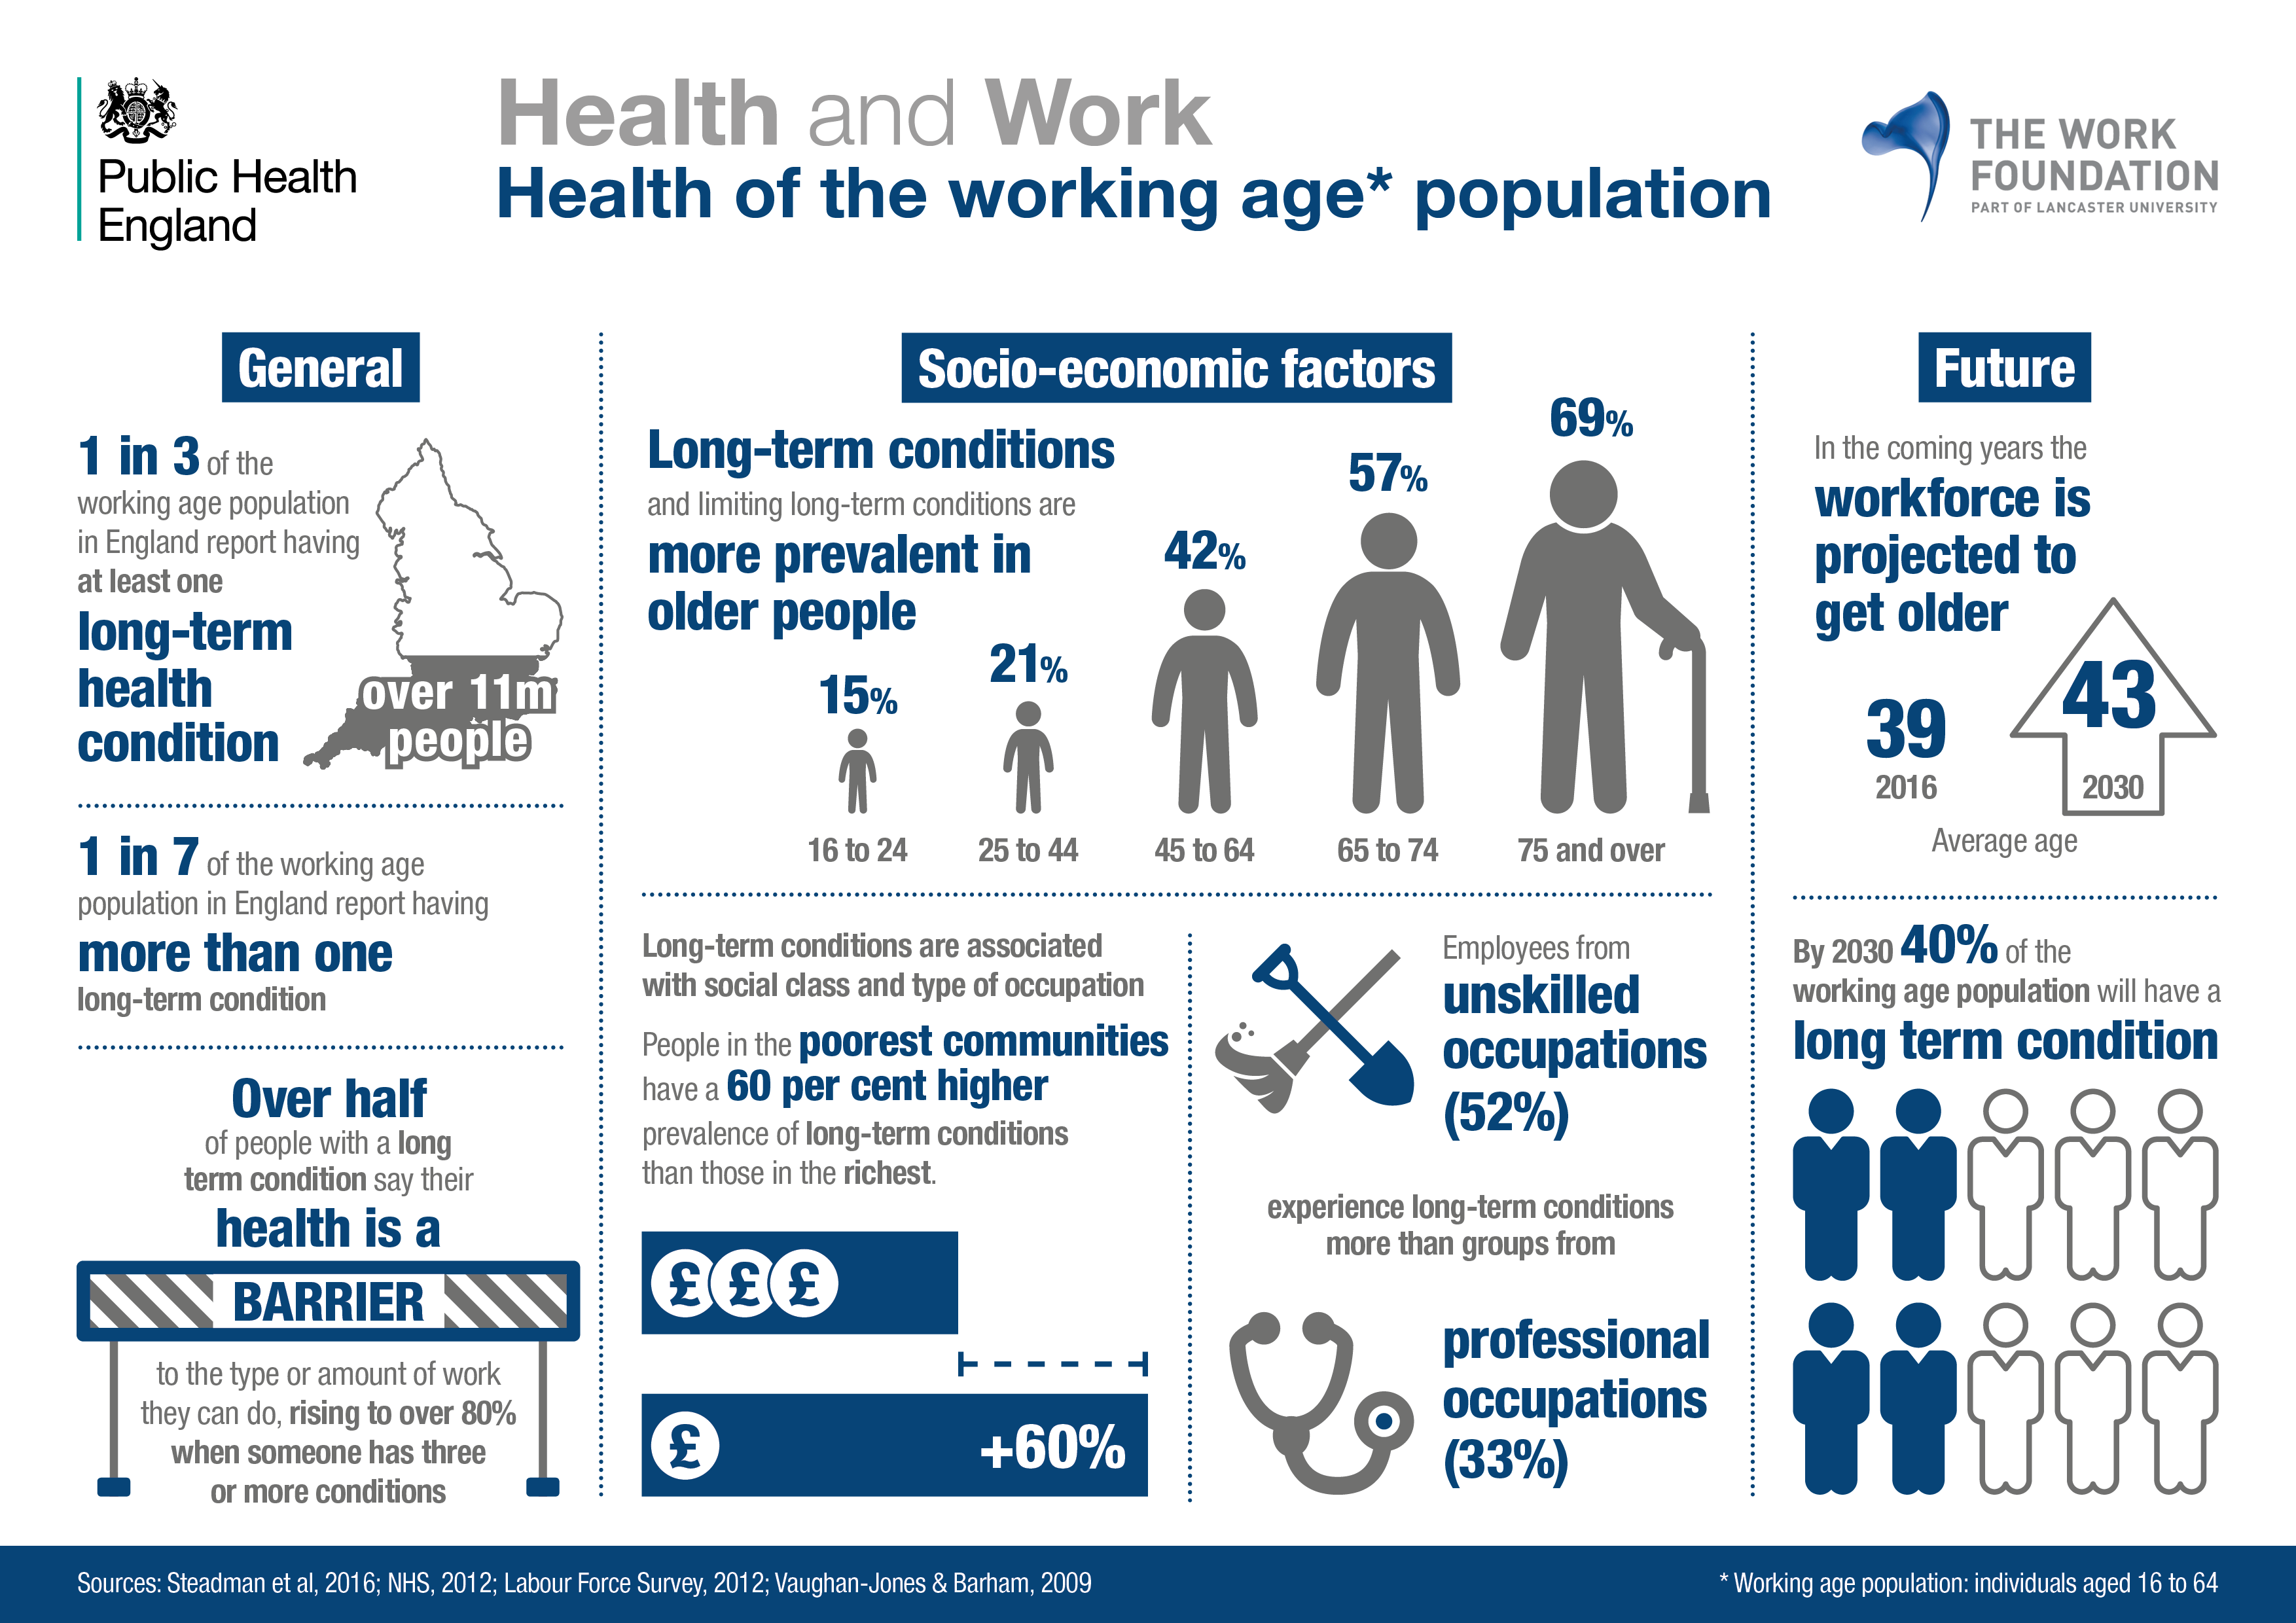 3 - Health of the working age population